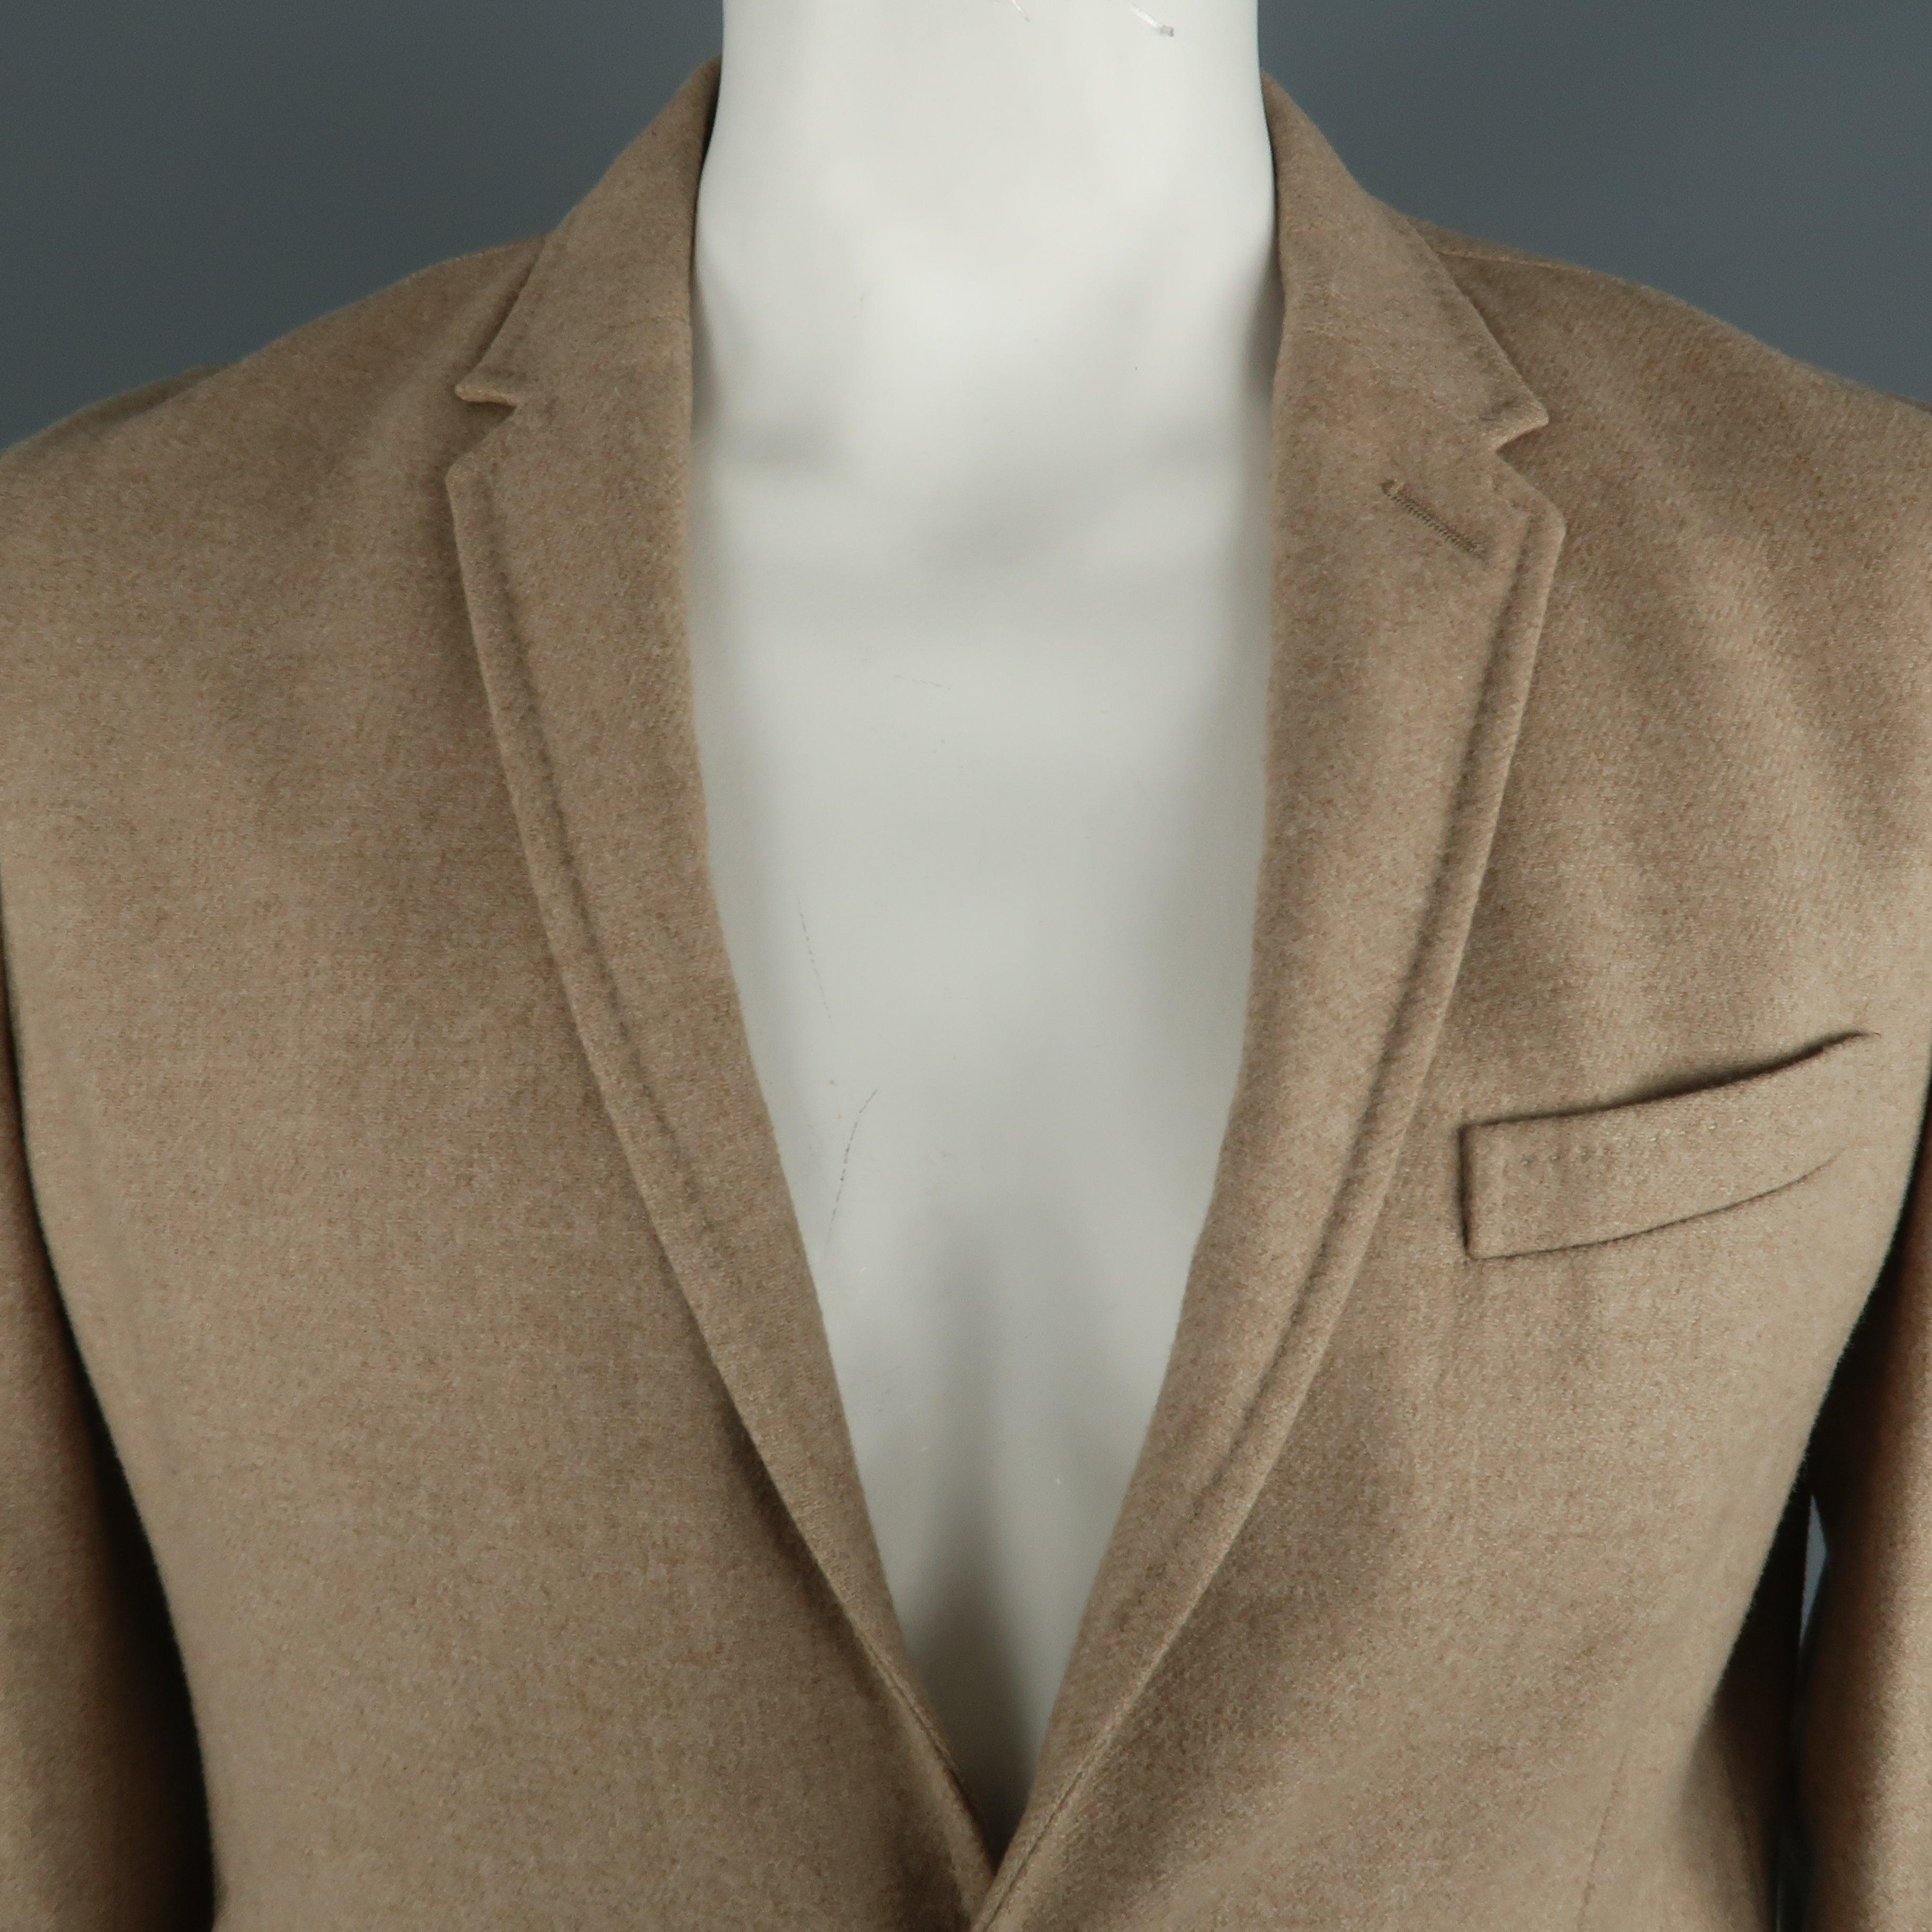 NEIL BARRETT sport coat comes in a camel wool featuring a notch lapel, two button closure, and flap pockets. Made in Italy. 
Excellent Pre-Owned Condition.
 

Marked:   XL
 

Measurements: 
  
l	Shoulder: 19 inches  
l	Chest: 42 inches  
l	Sleeve: